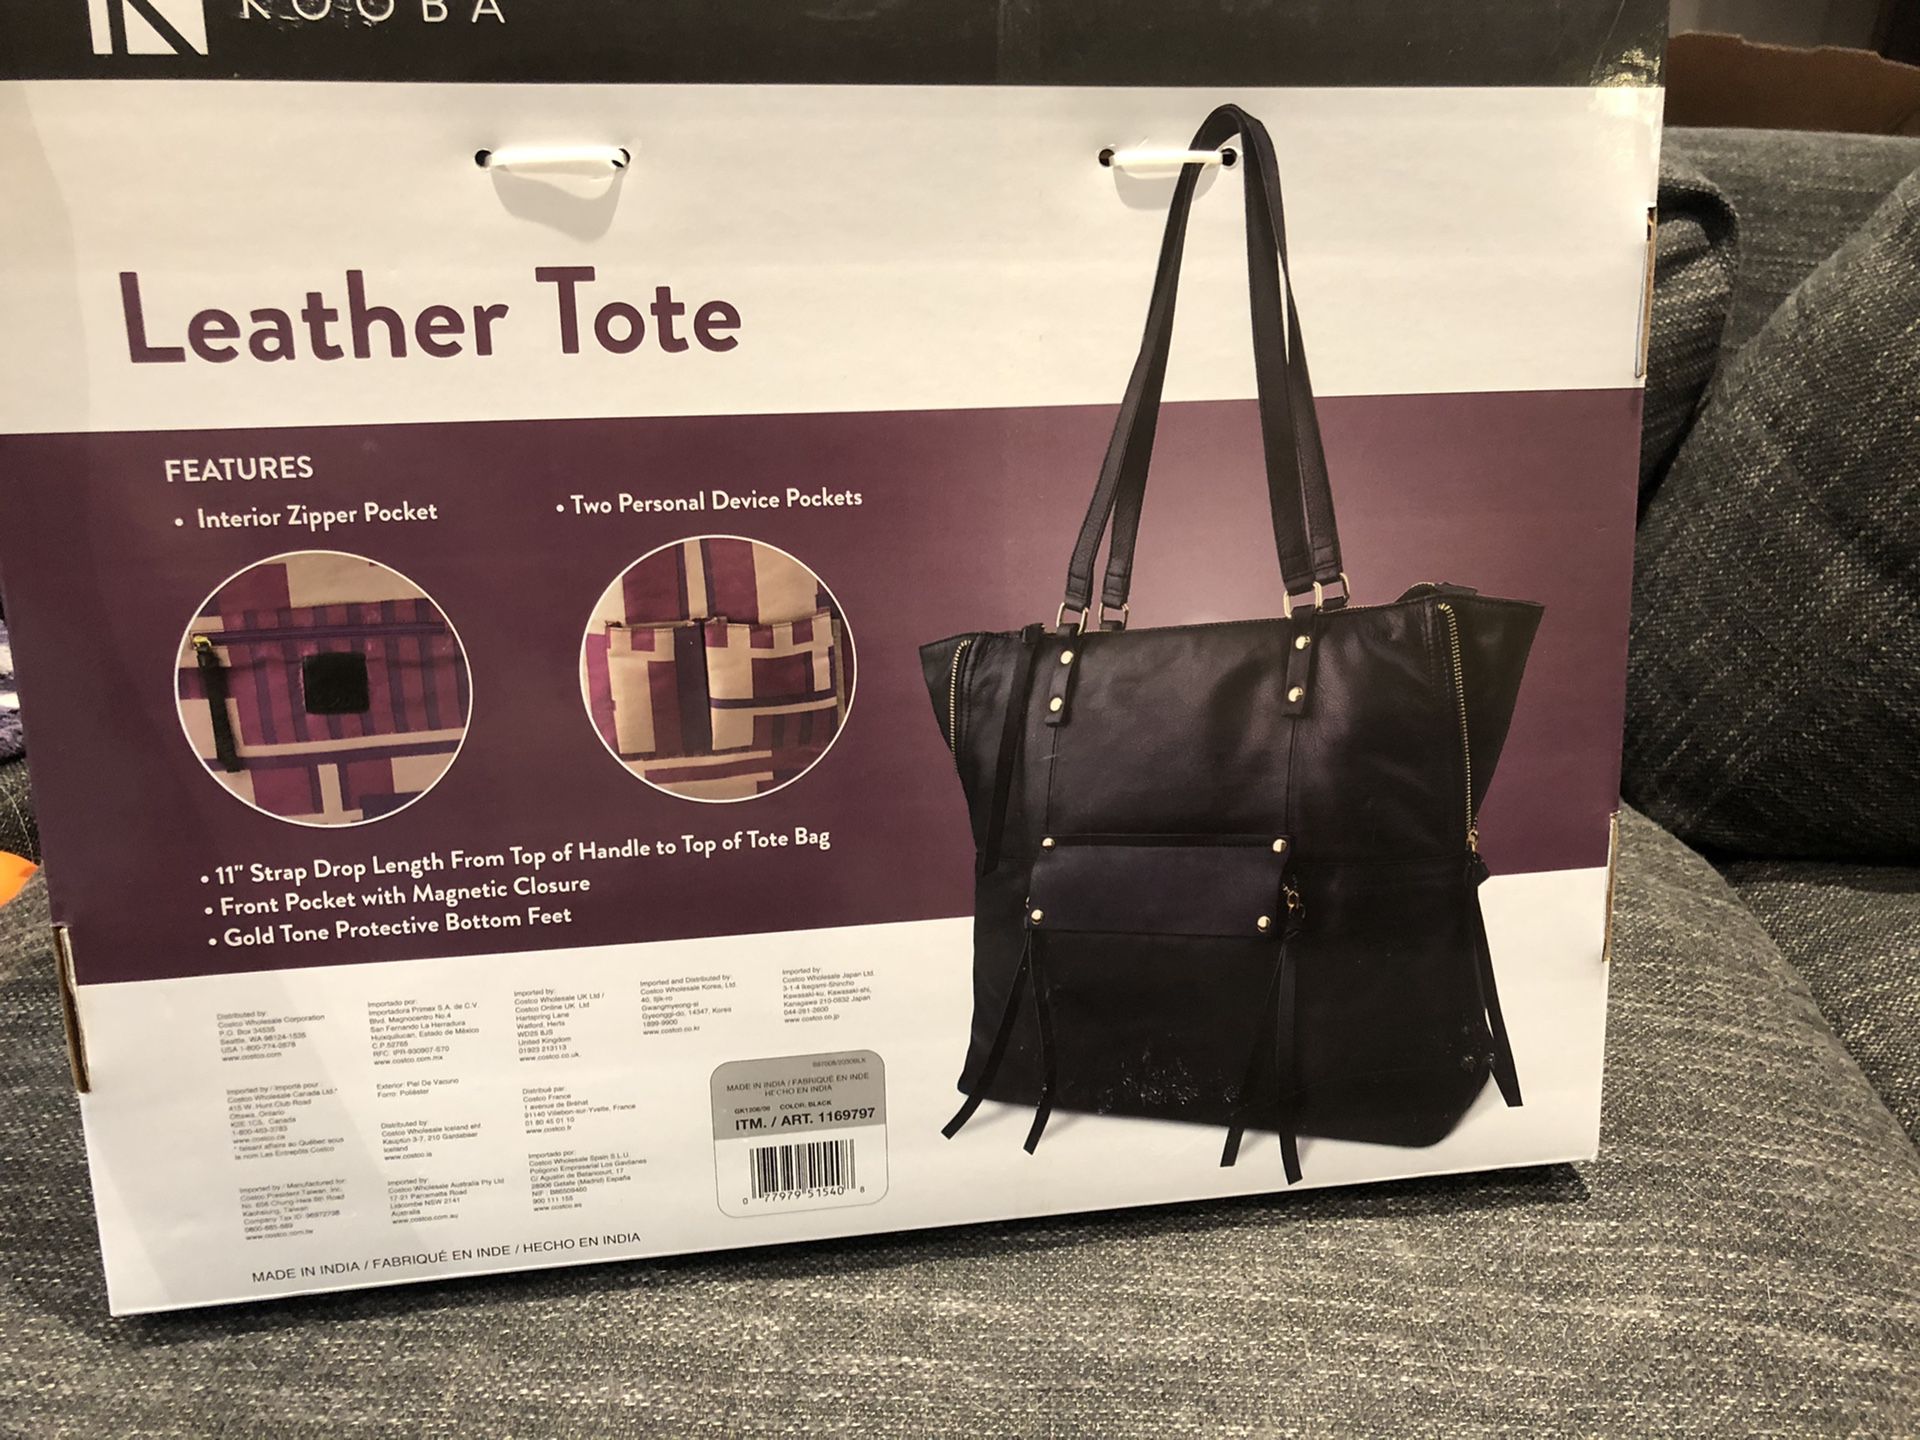 Brand new leather tote bag